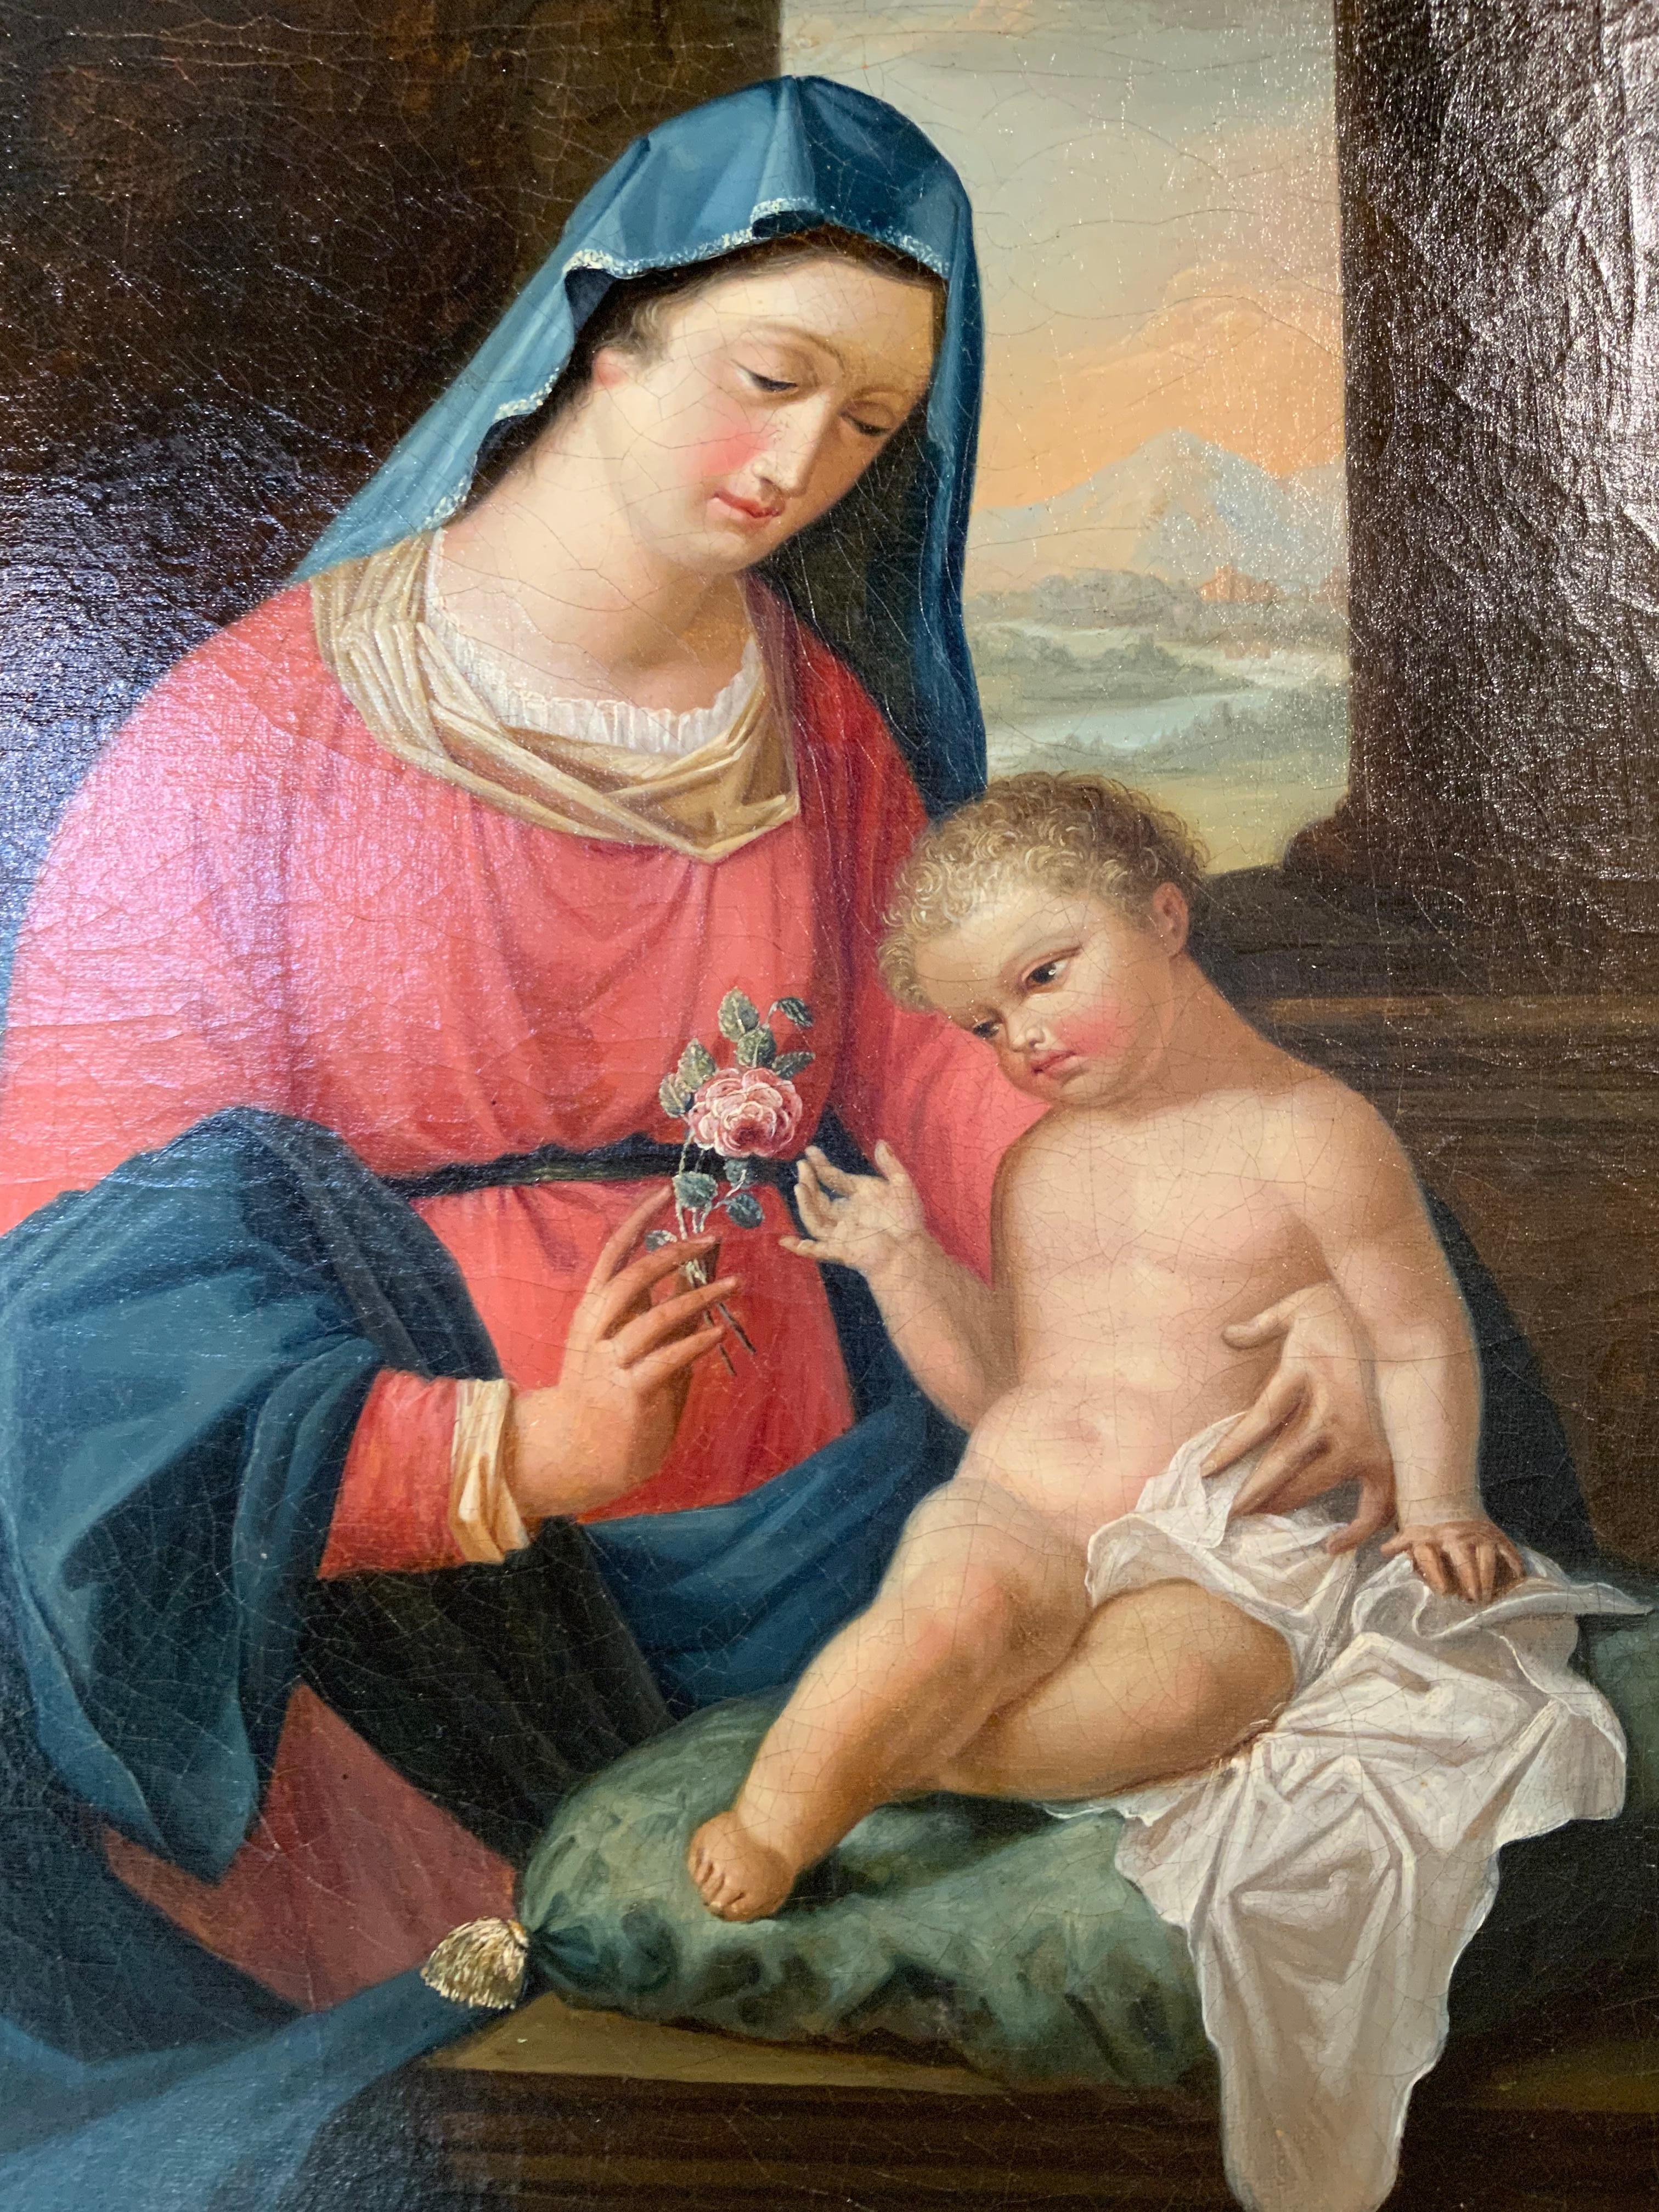 Paint Religious Oil on Canvas 18th C. Virgin Mother and Christ Child “the Rose”